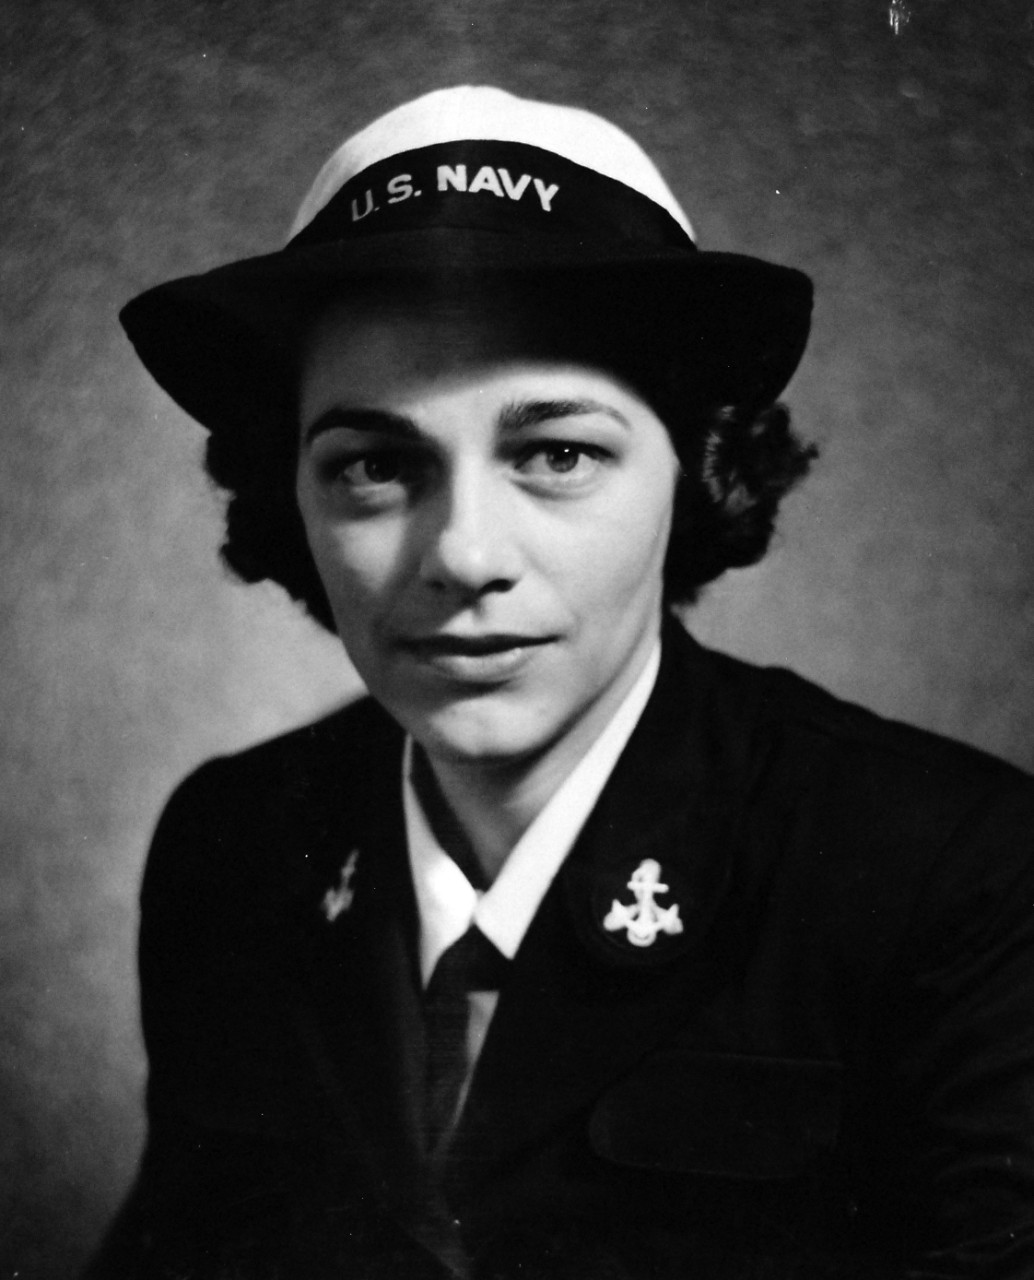 80-G-41569:   Yeoman Mary Twitchell Arrison, USNR, May 1943.   Arrison has been selected for promotion to officer rank in the Women’s Reserve, USNR.  She will report for training to the U.S. Naval Reserve Midshipmen’s School, Northampton, Massachusetts, June 5.     Photograph released May 20, 1943.  Official U.S. Navy Photograph, now in the collections of the National Archives. 